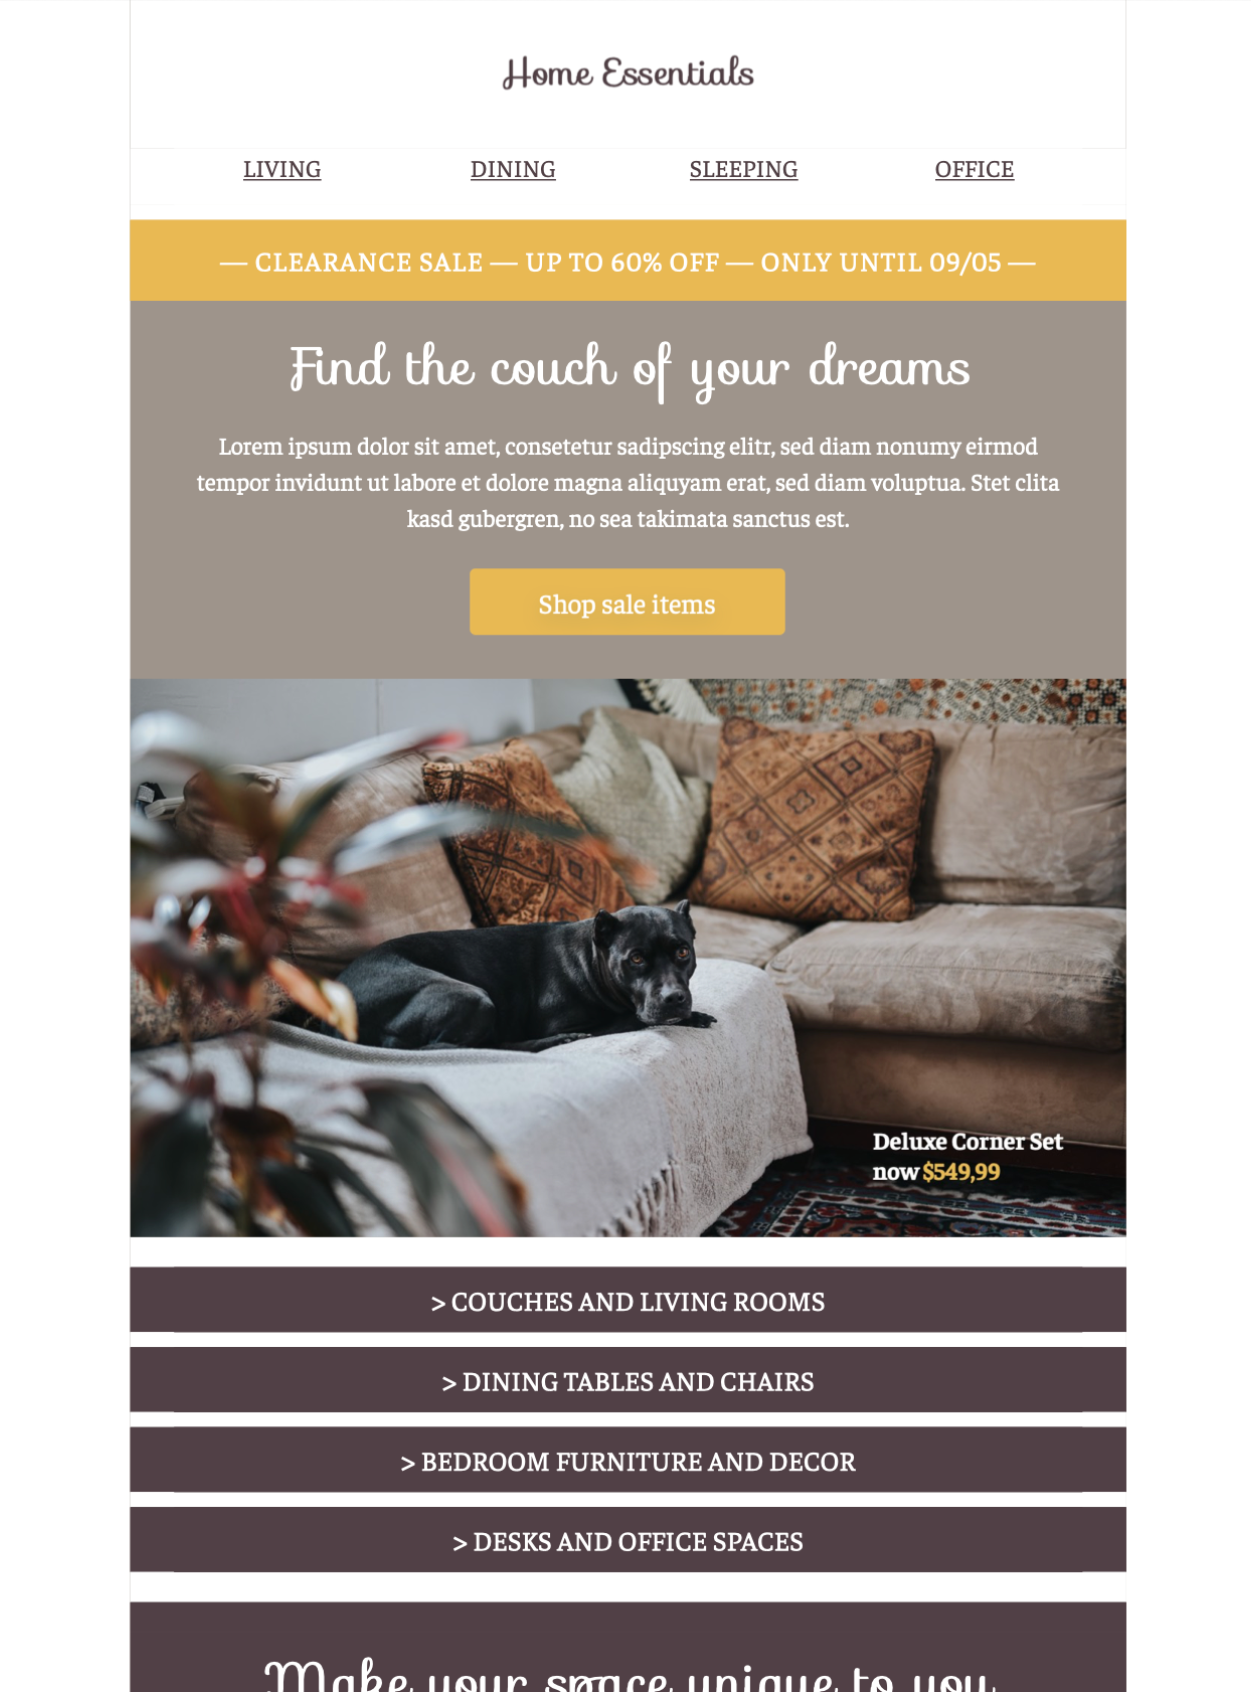 home essentials email template